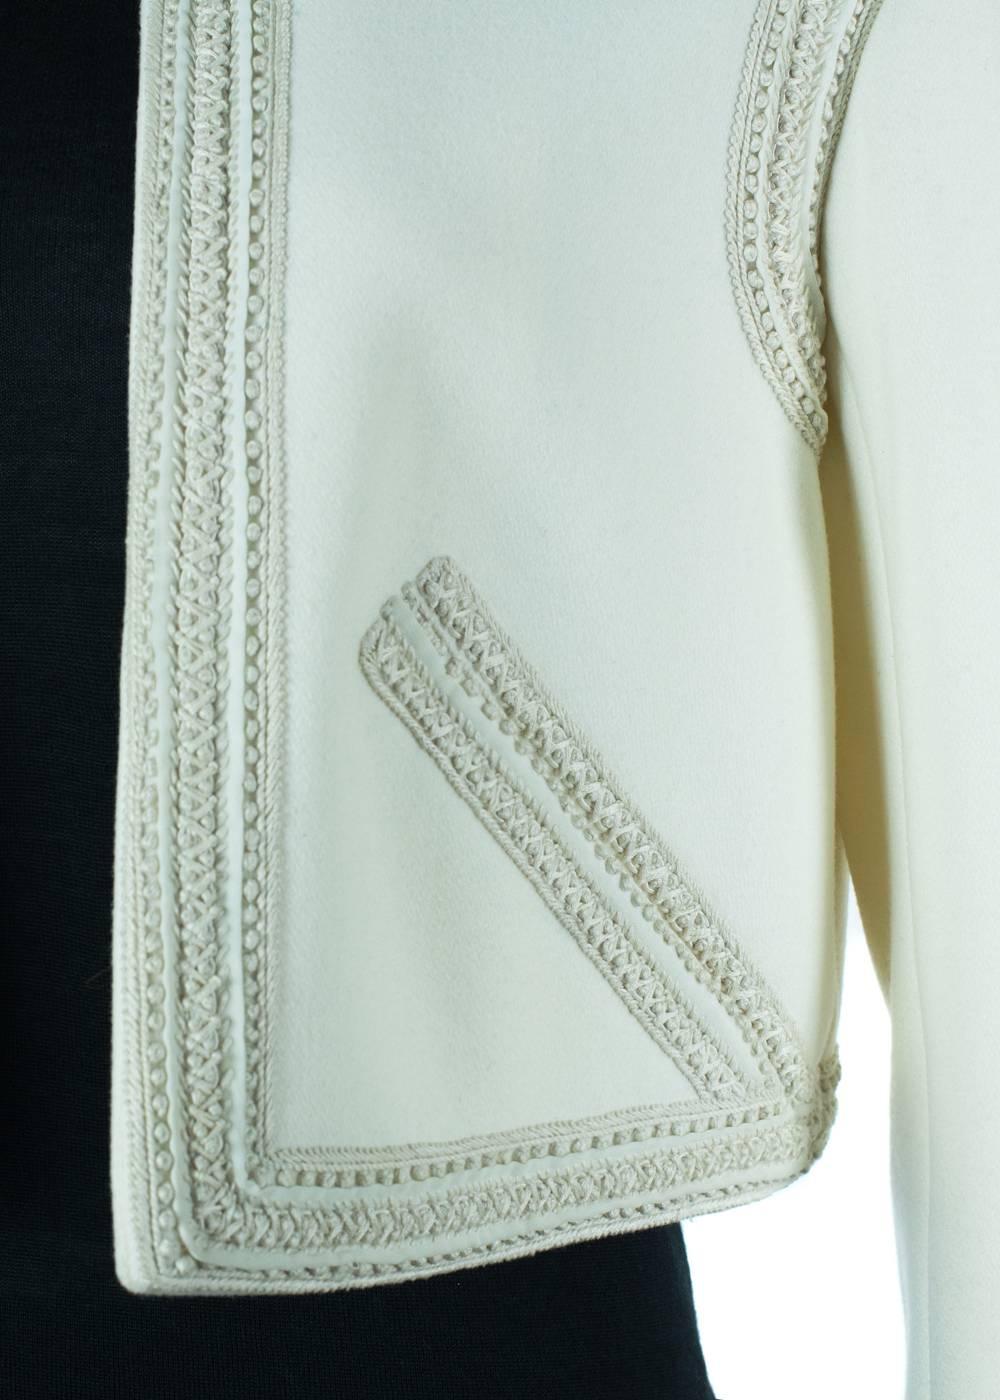 Brand New Valentino Jacket
Original Tag & Hanger Included
Retails in Stores & Online for $1800
Size IT40 / US4 Fits True to Size


This Valentino Ivory White Cropped Jacket with Woven embroideries is super versatile. Can be worn at a dressy, casual